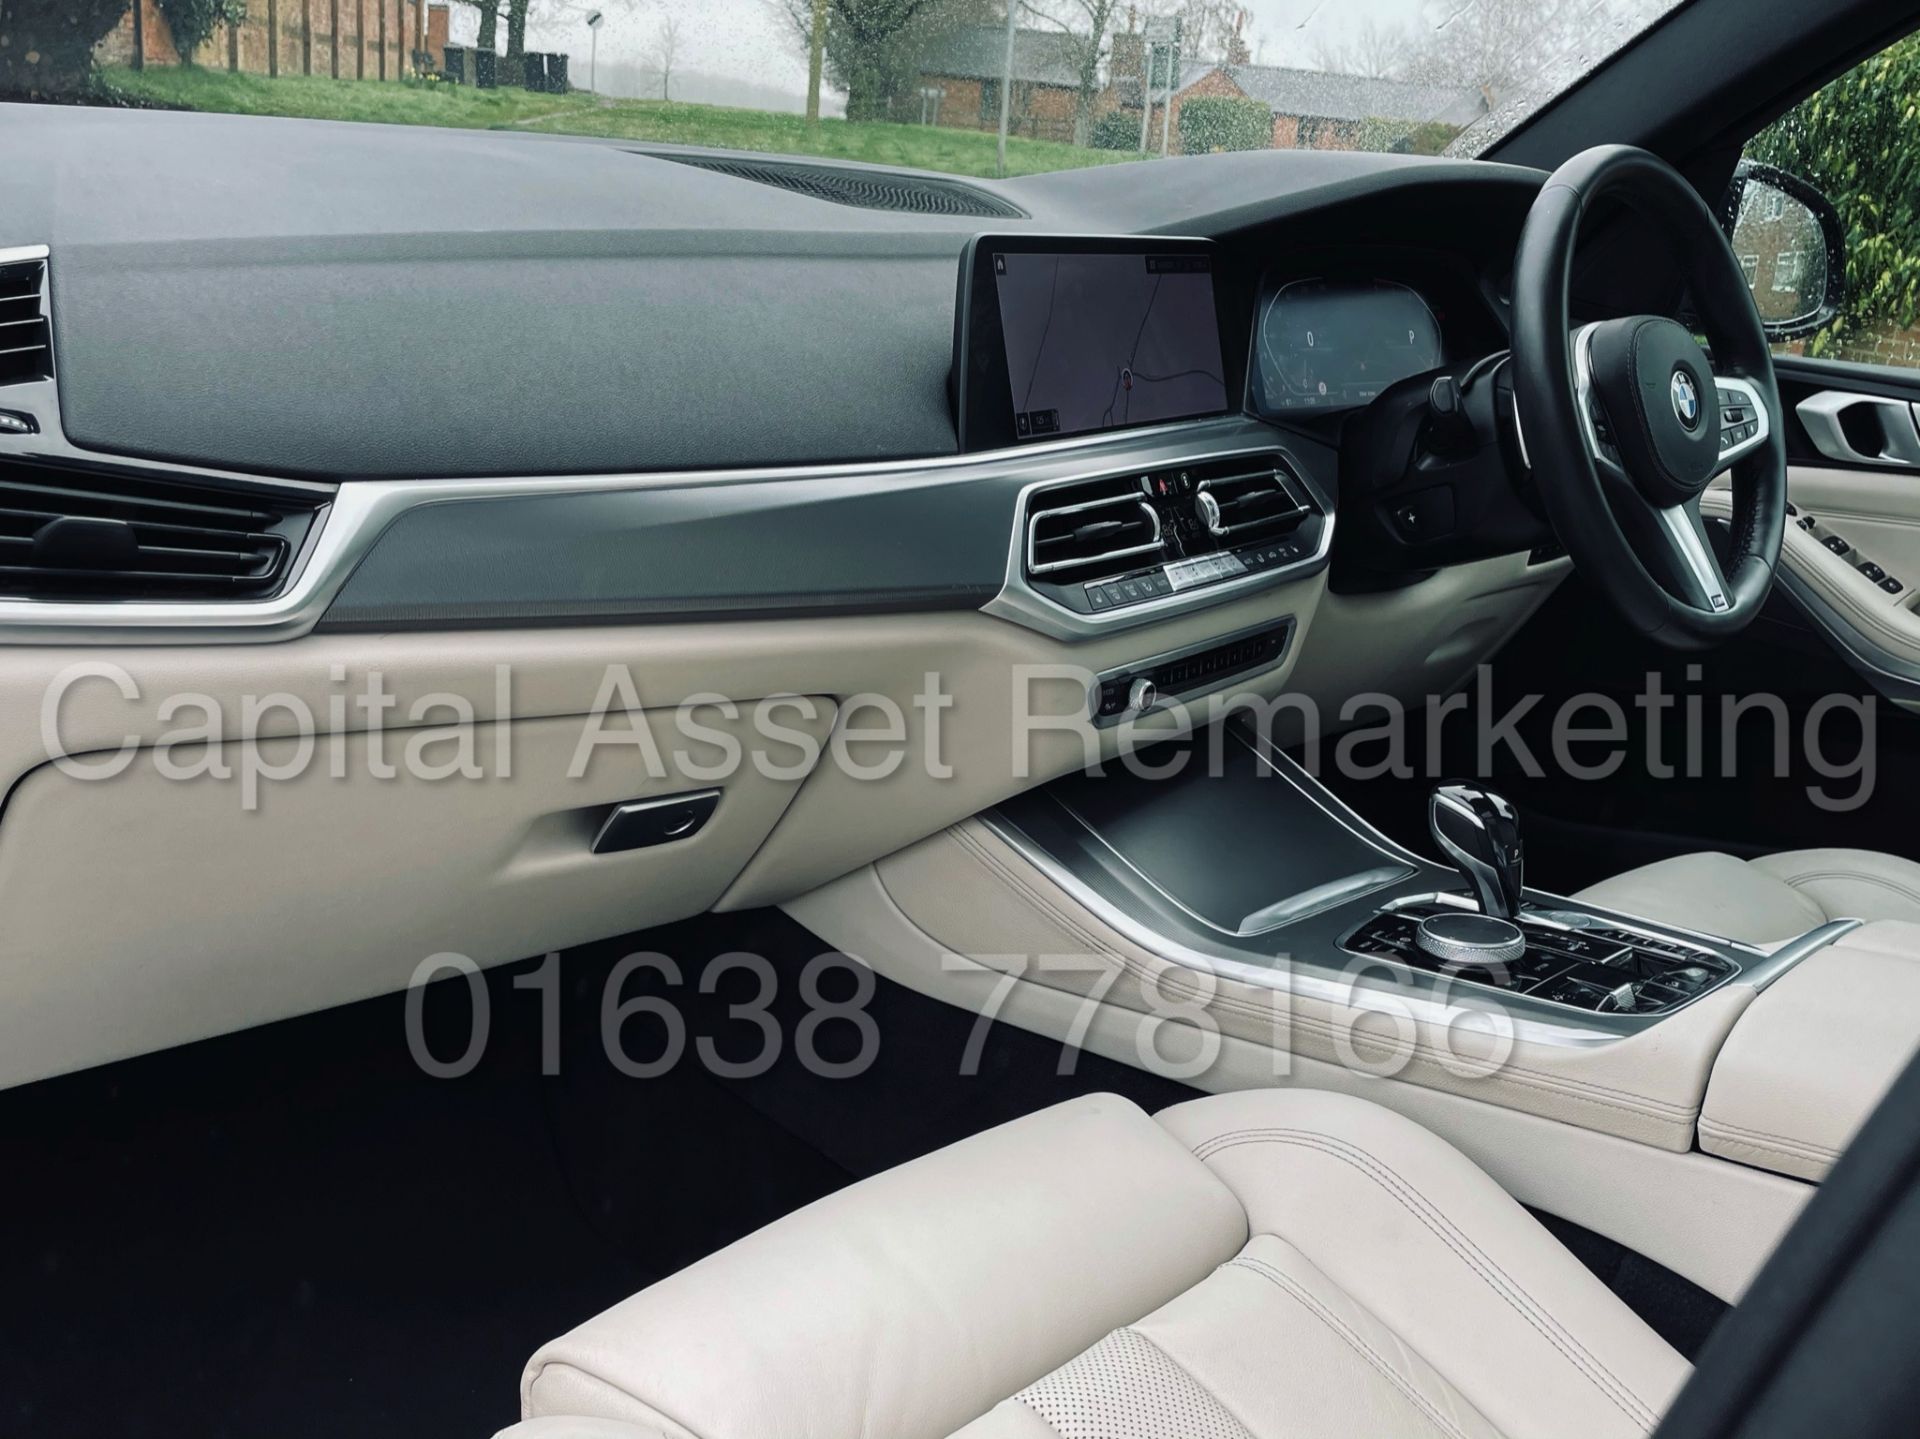 (On Sale) BMW X5 *M SPORT* X-DRIVE *7 SEATER SUV* (2019 - EURO 6) '3.0 DIESEL - AUTO' *PAN ROOF* - Image 22 of 70